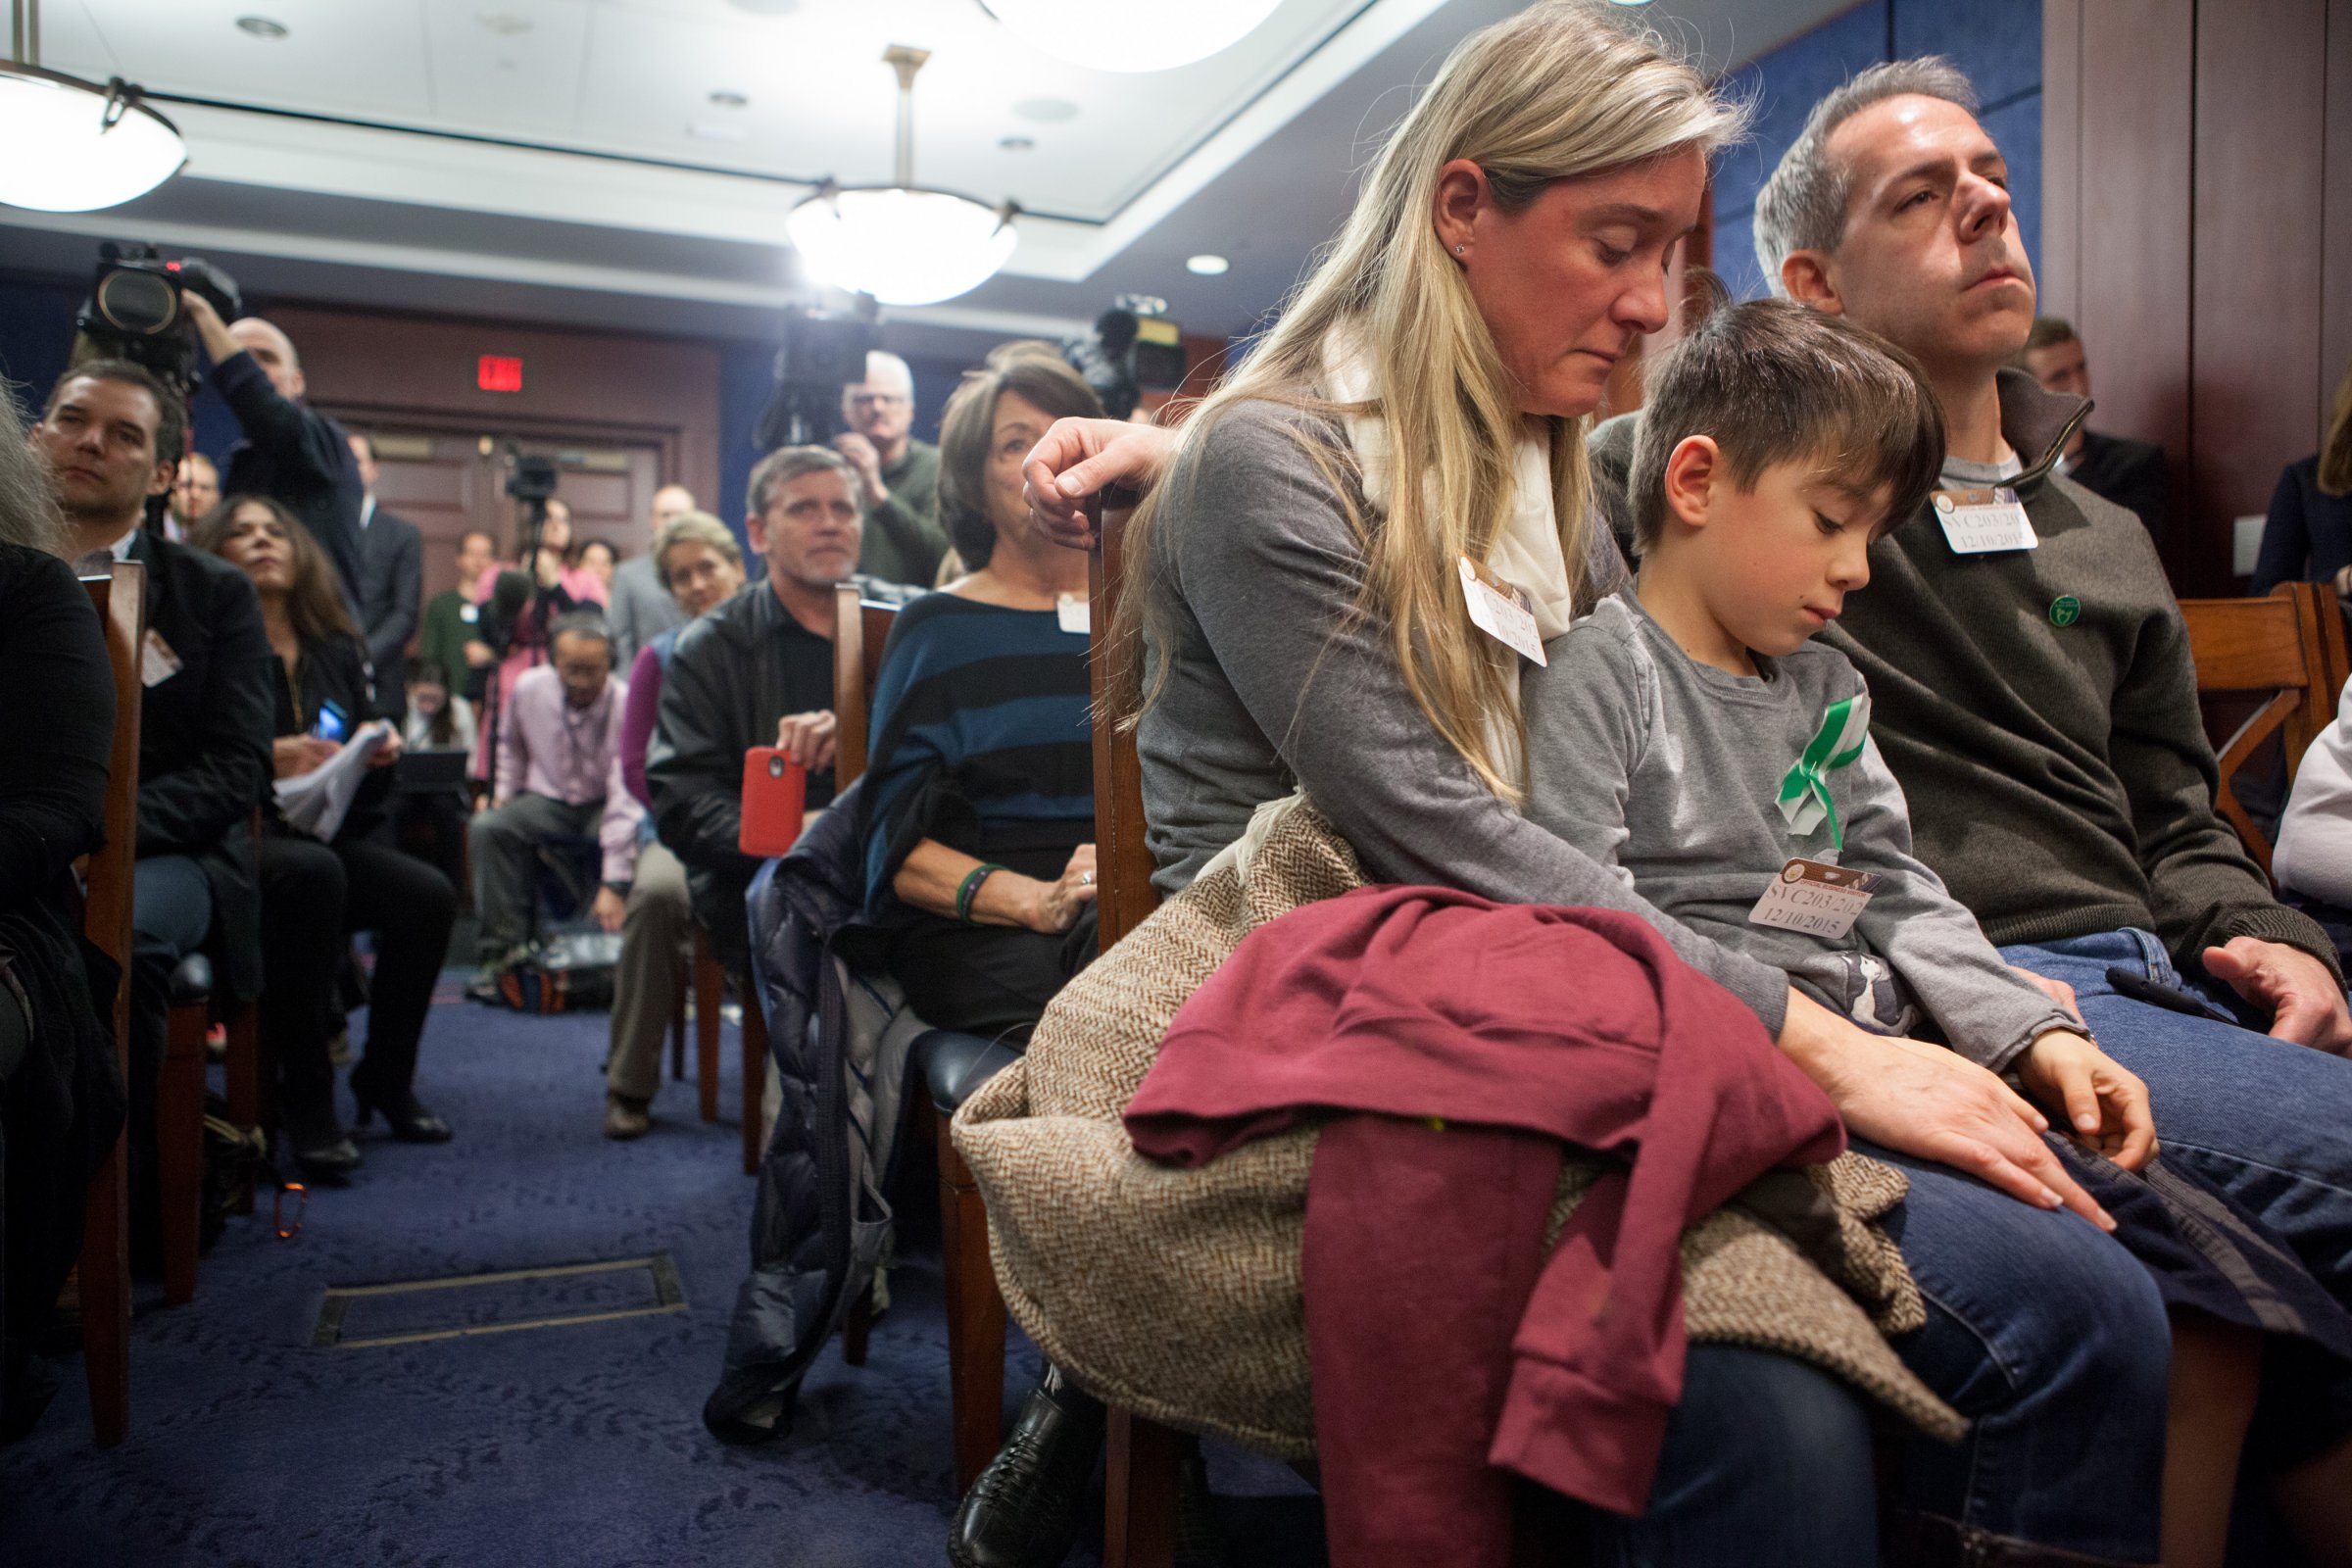 Rafe D'Agostino, 7, a second grader, sits between his parents Noelle and Paul D'Agostino during a press conference on Capitol Hill on Dec. 10.